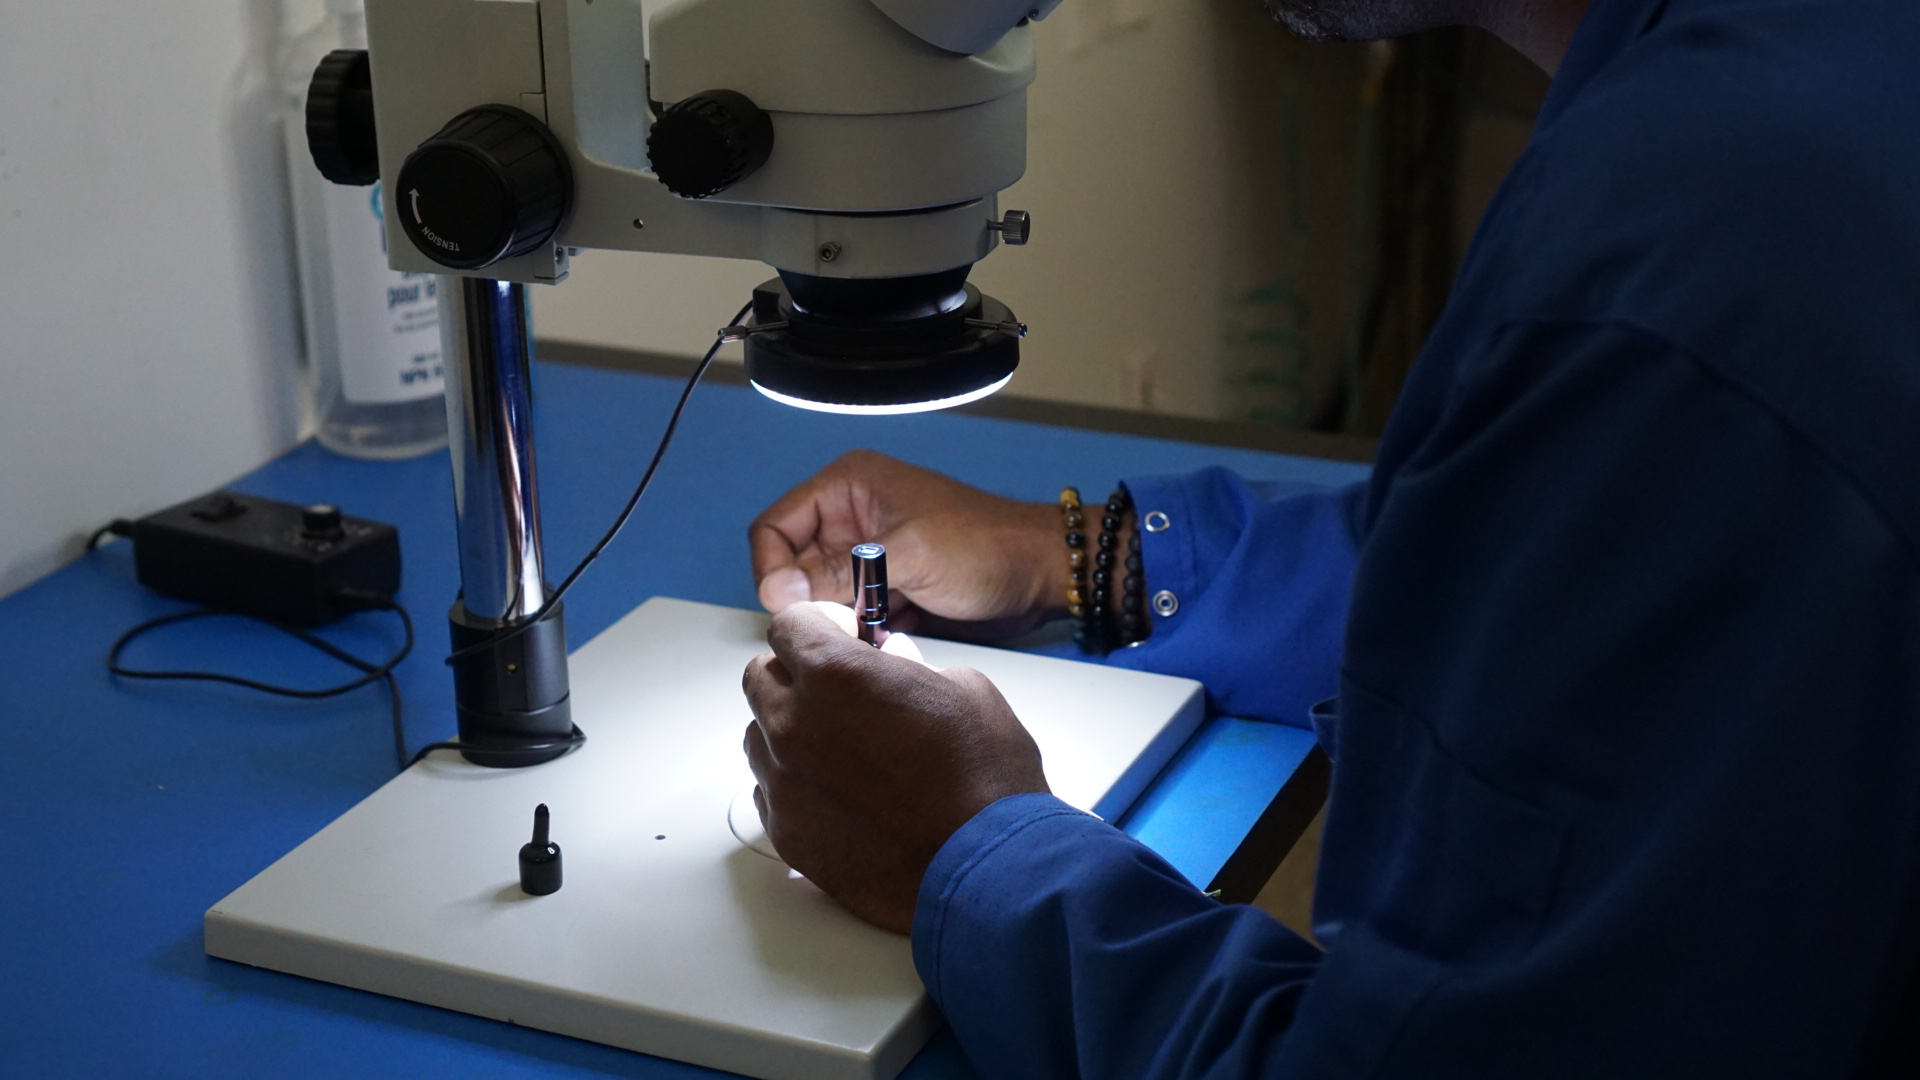 Quality Control Technician intently verifies optical surface quality of Compact Laser using Laboratory Microscope